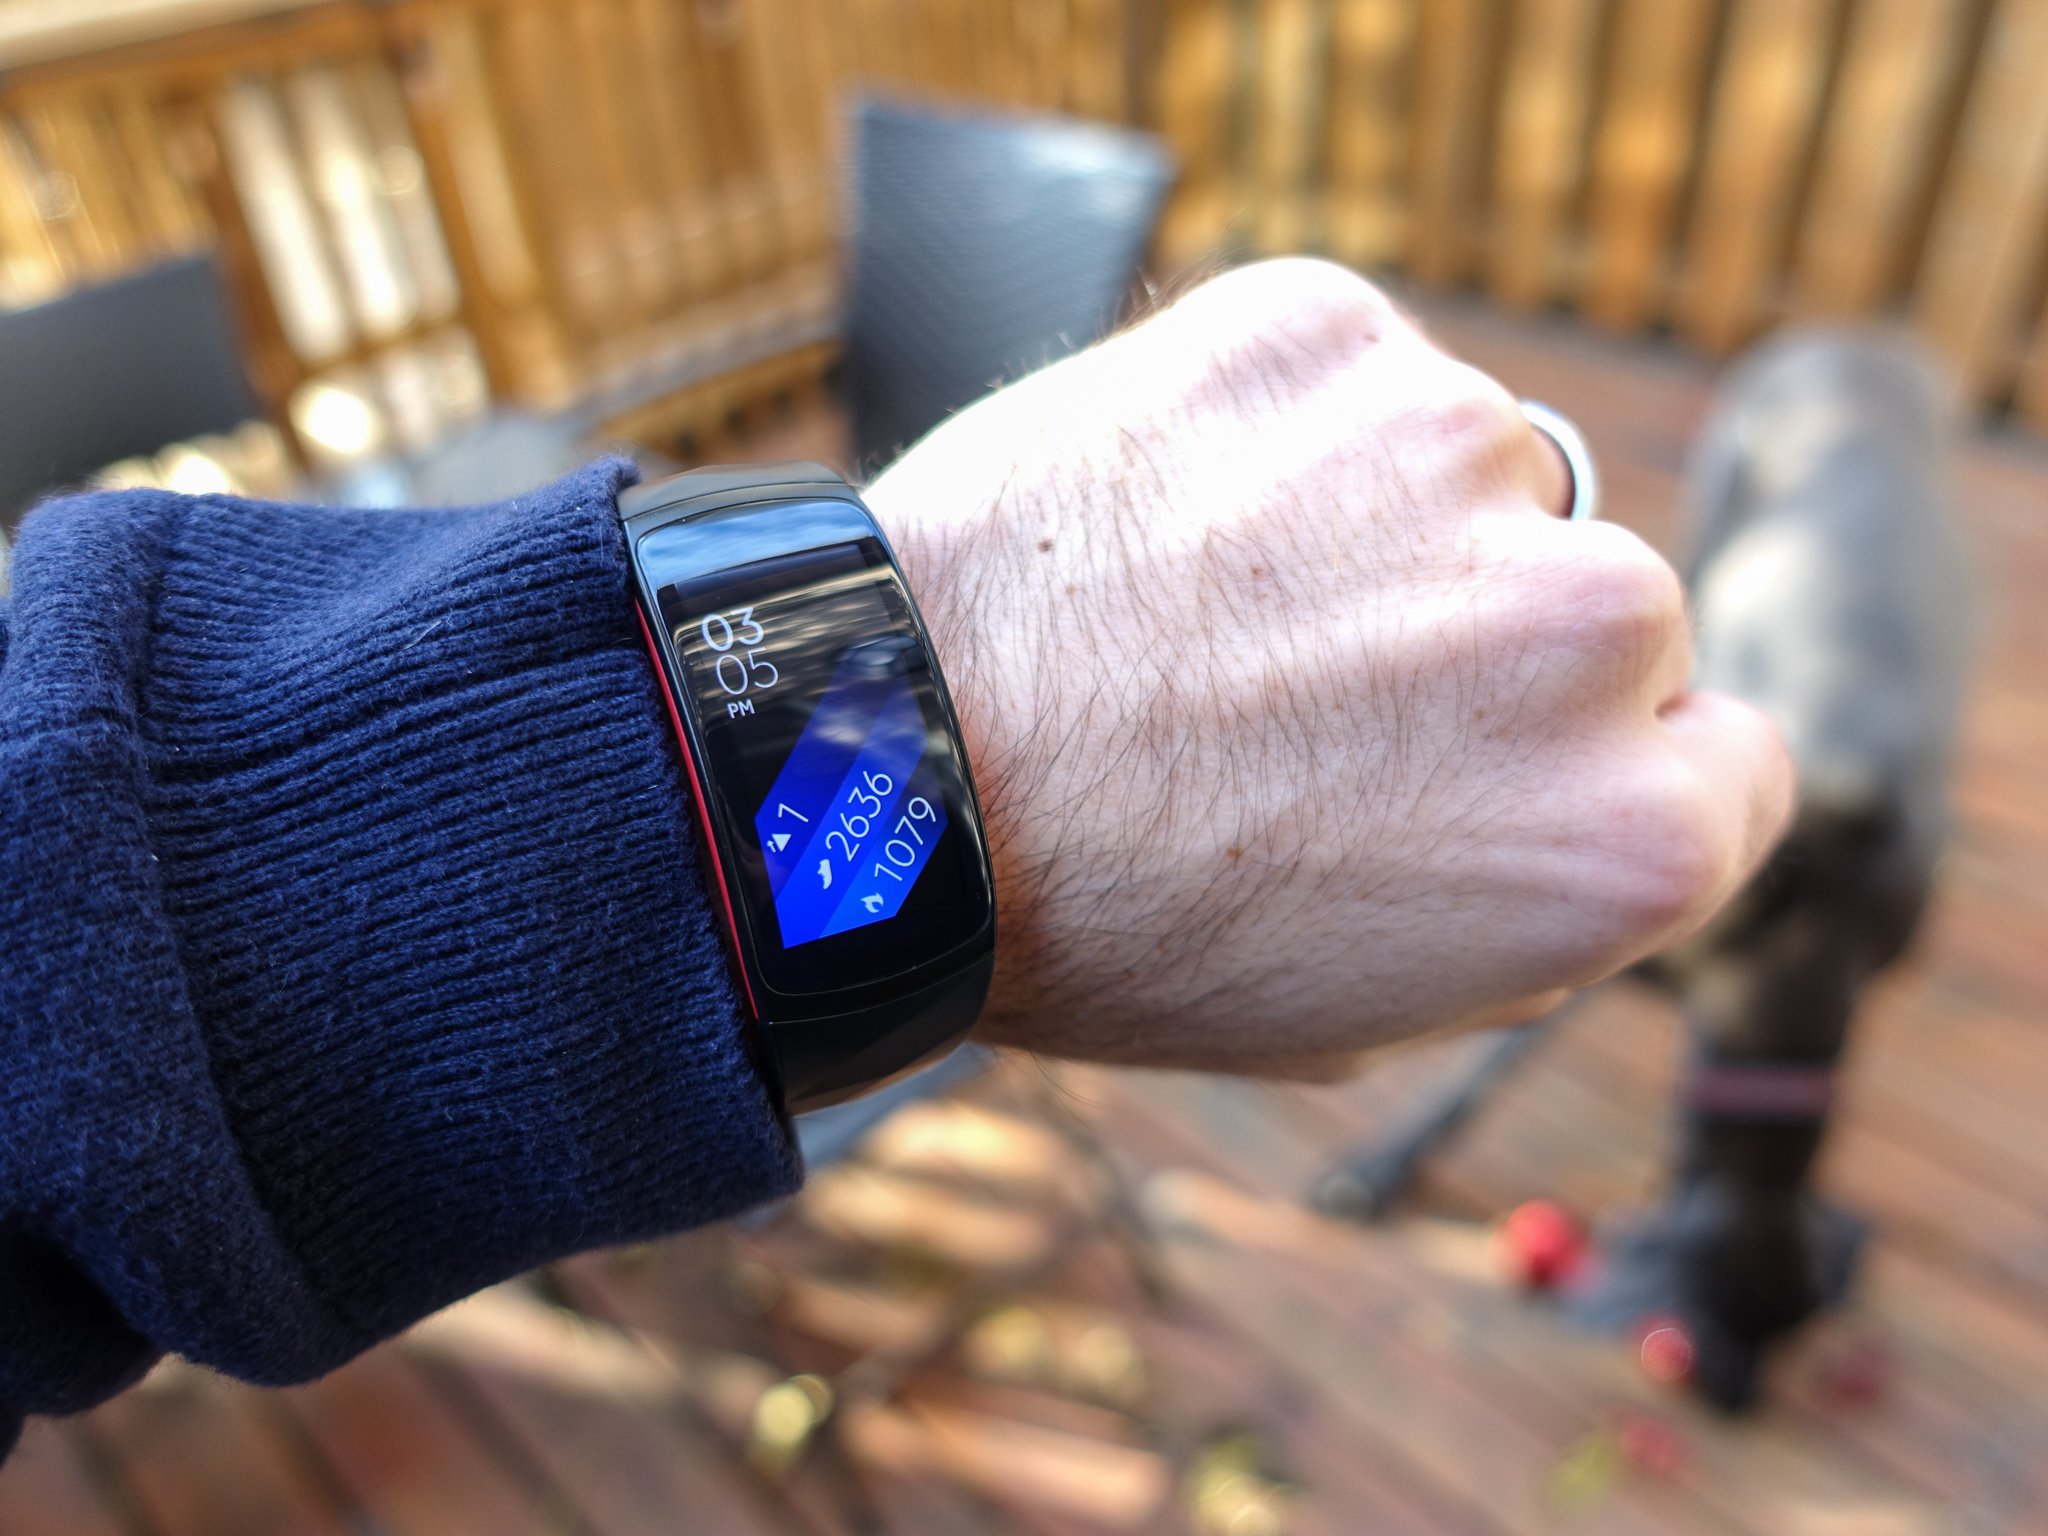 galaxy active 2 vs fitbit charge 3